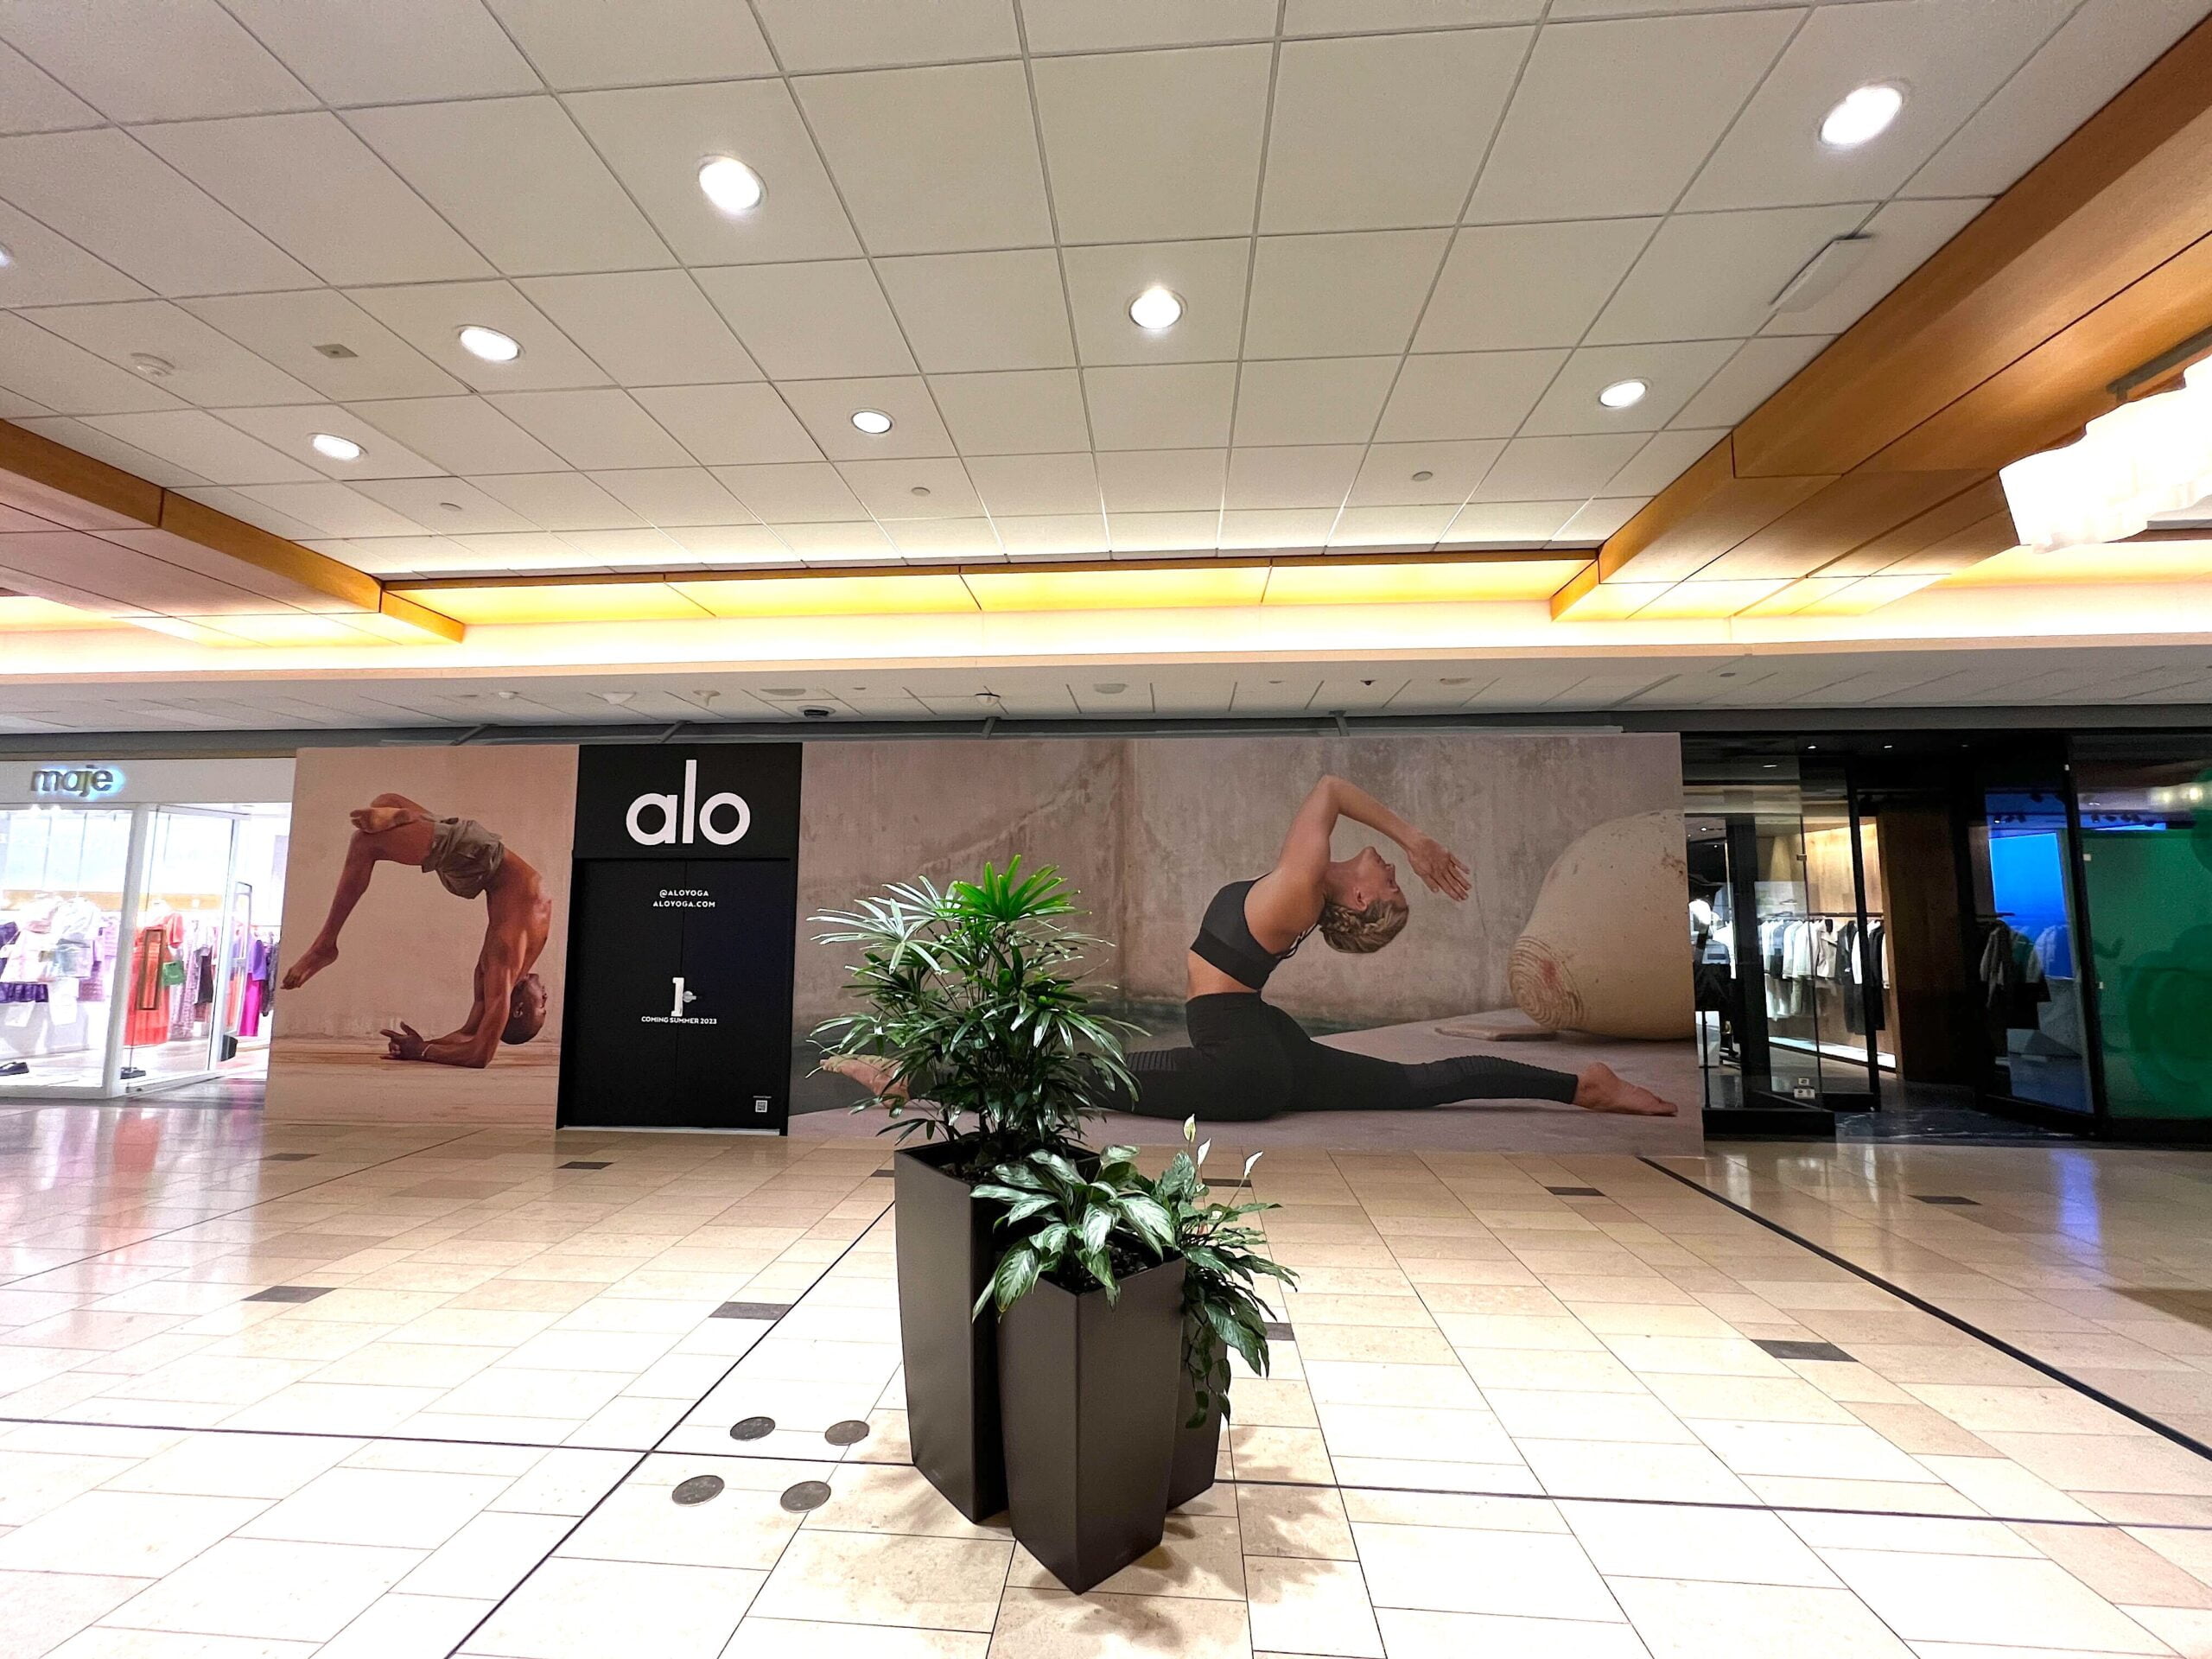 Alo Yoga Lands on Lululemon's Home Turf with 1st Vancouver Store